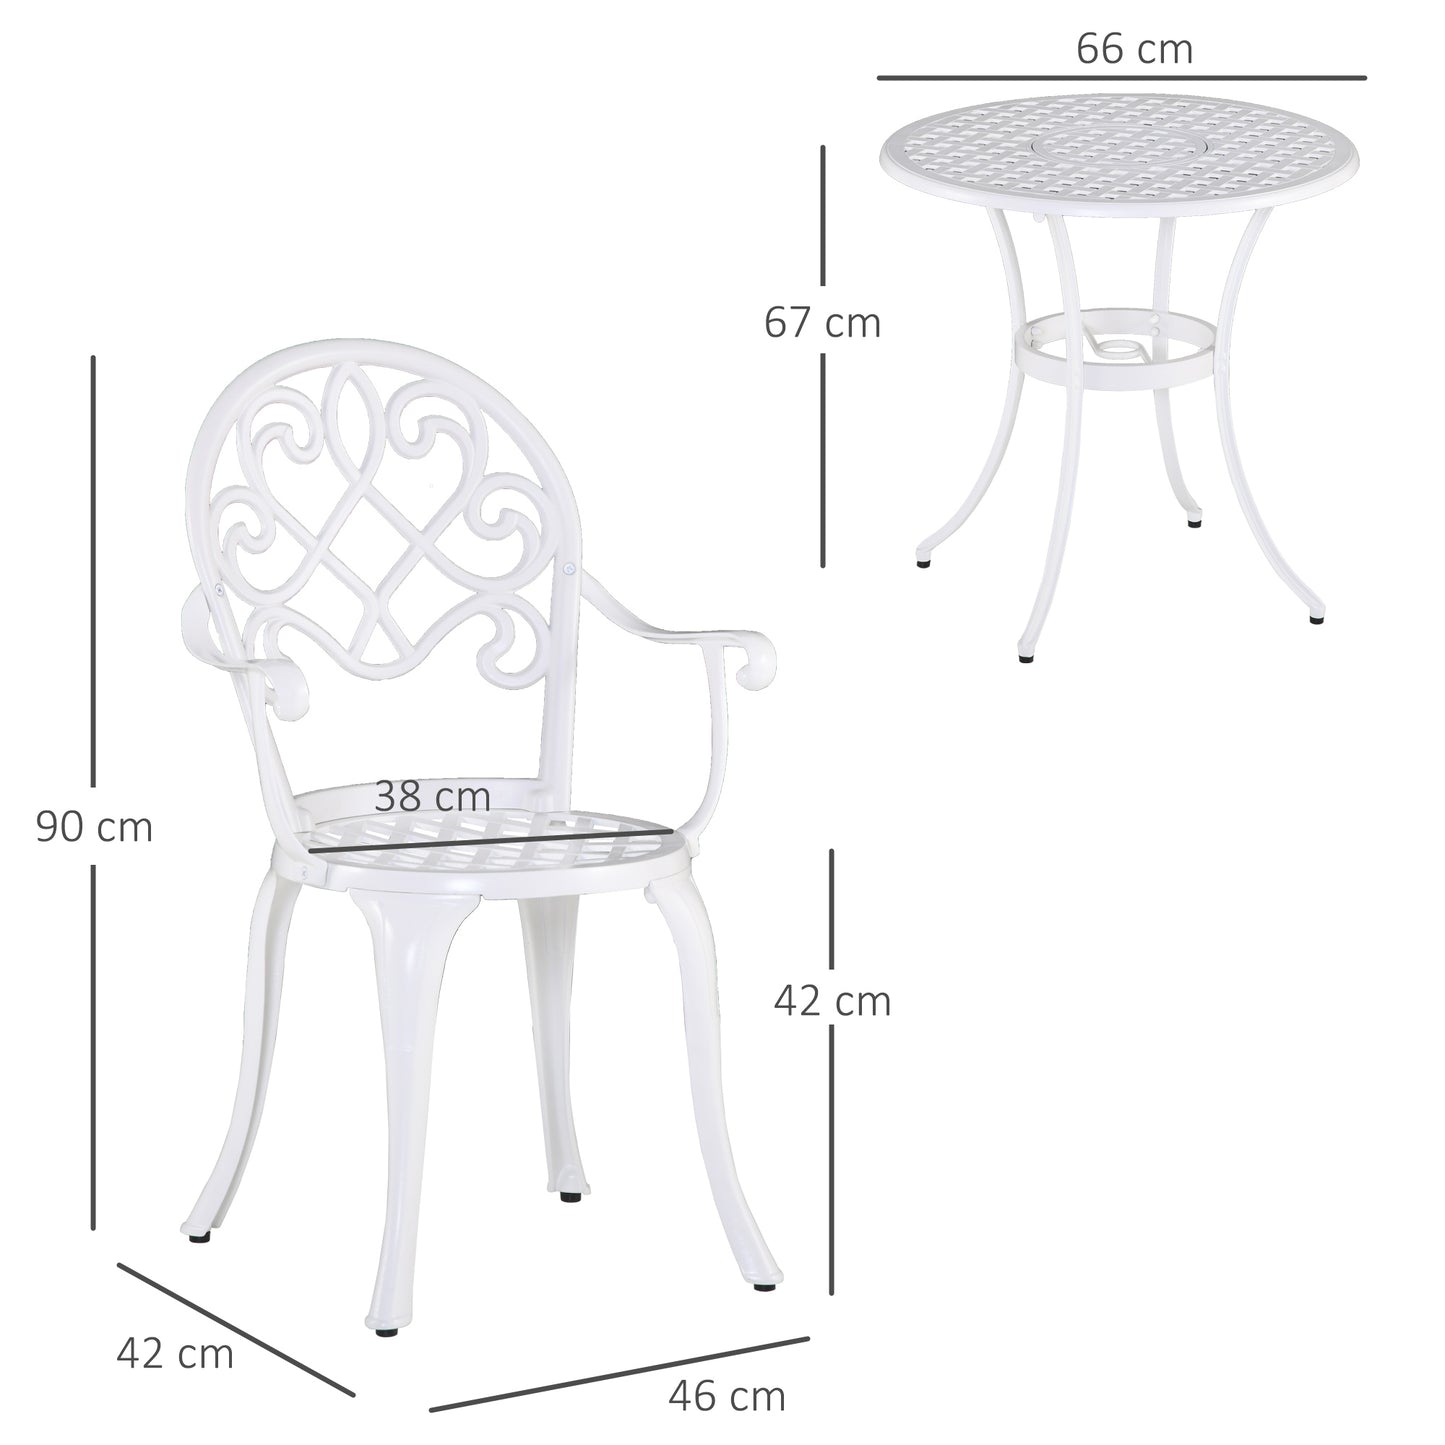 Outsunny 3PCs Garden Table Set Bistro Set Round Table and 2 Chairs for Outdoor Indoor Patio Balcony Aluminium